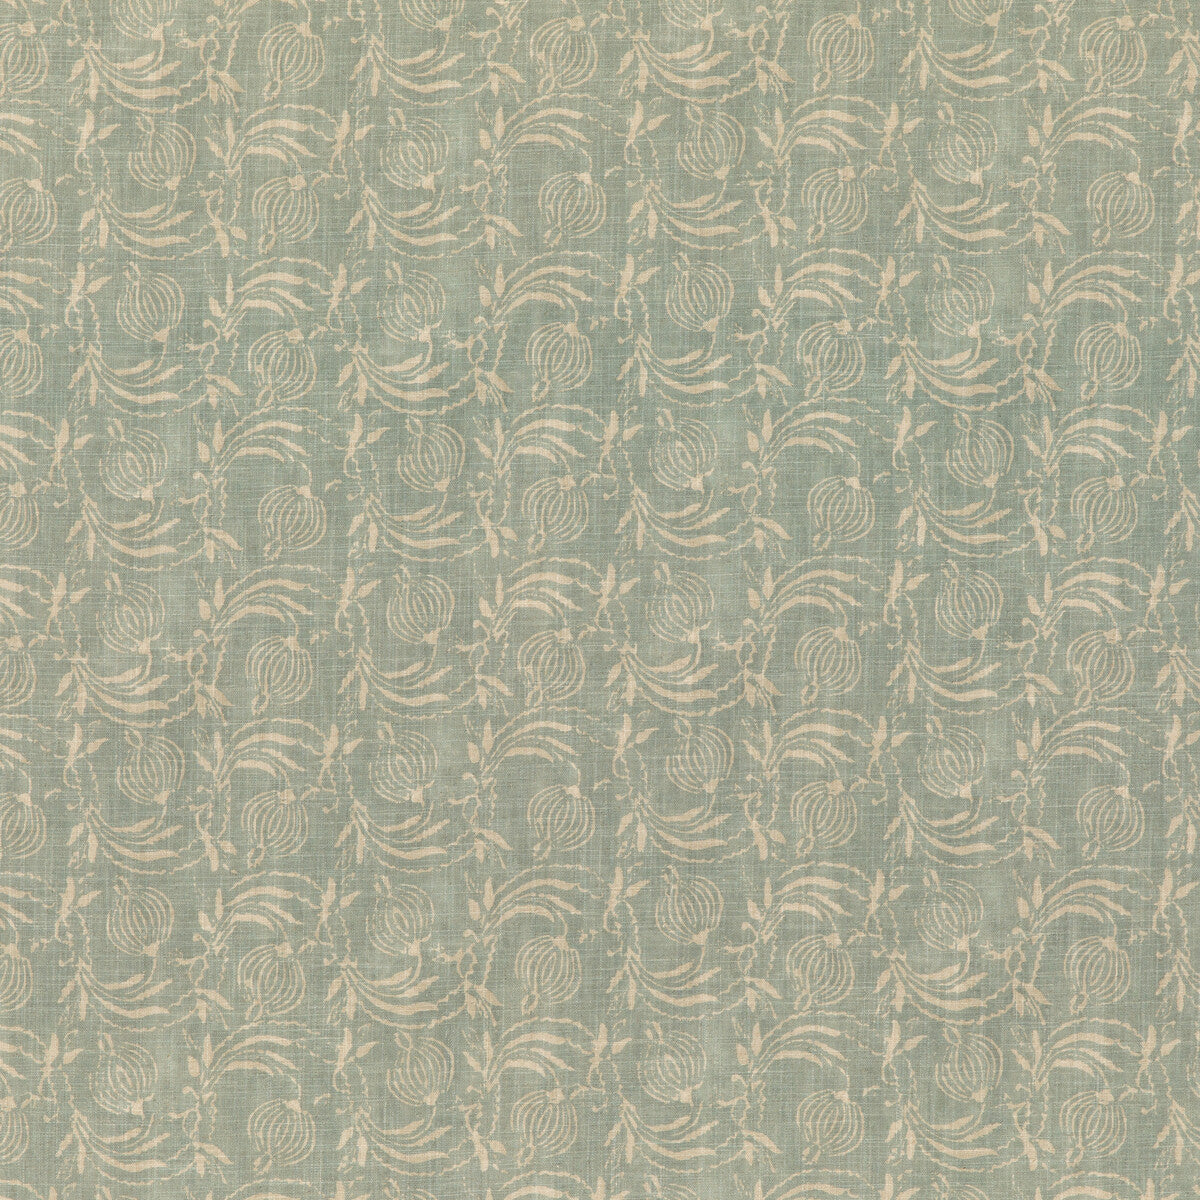 Pomegranate fabric in aqua color - pattern BP10825.4.0 - by G P &amp; J Baker in the Coromandel Small Prints collection